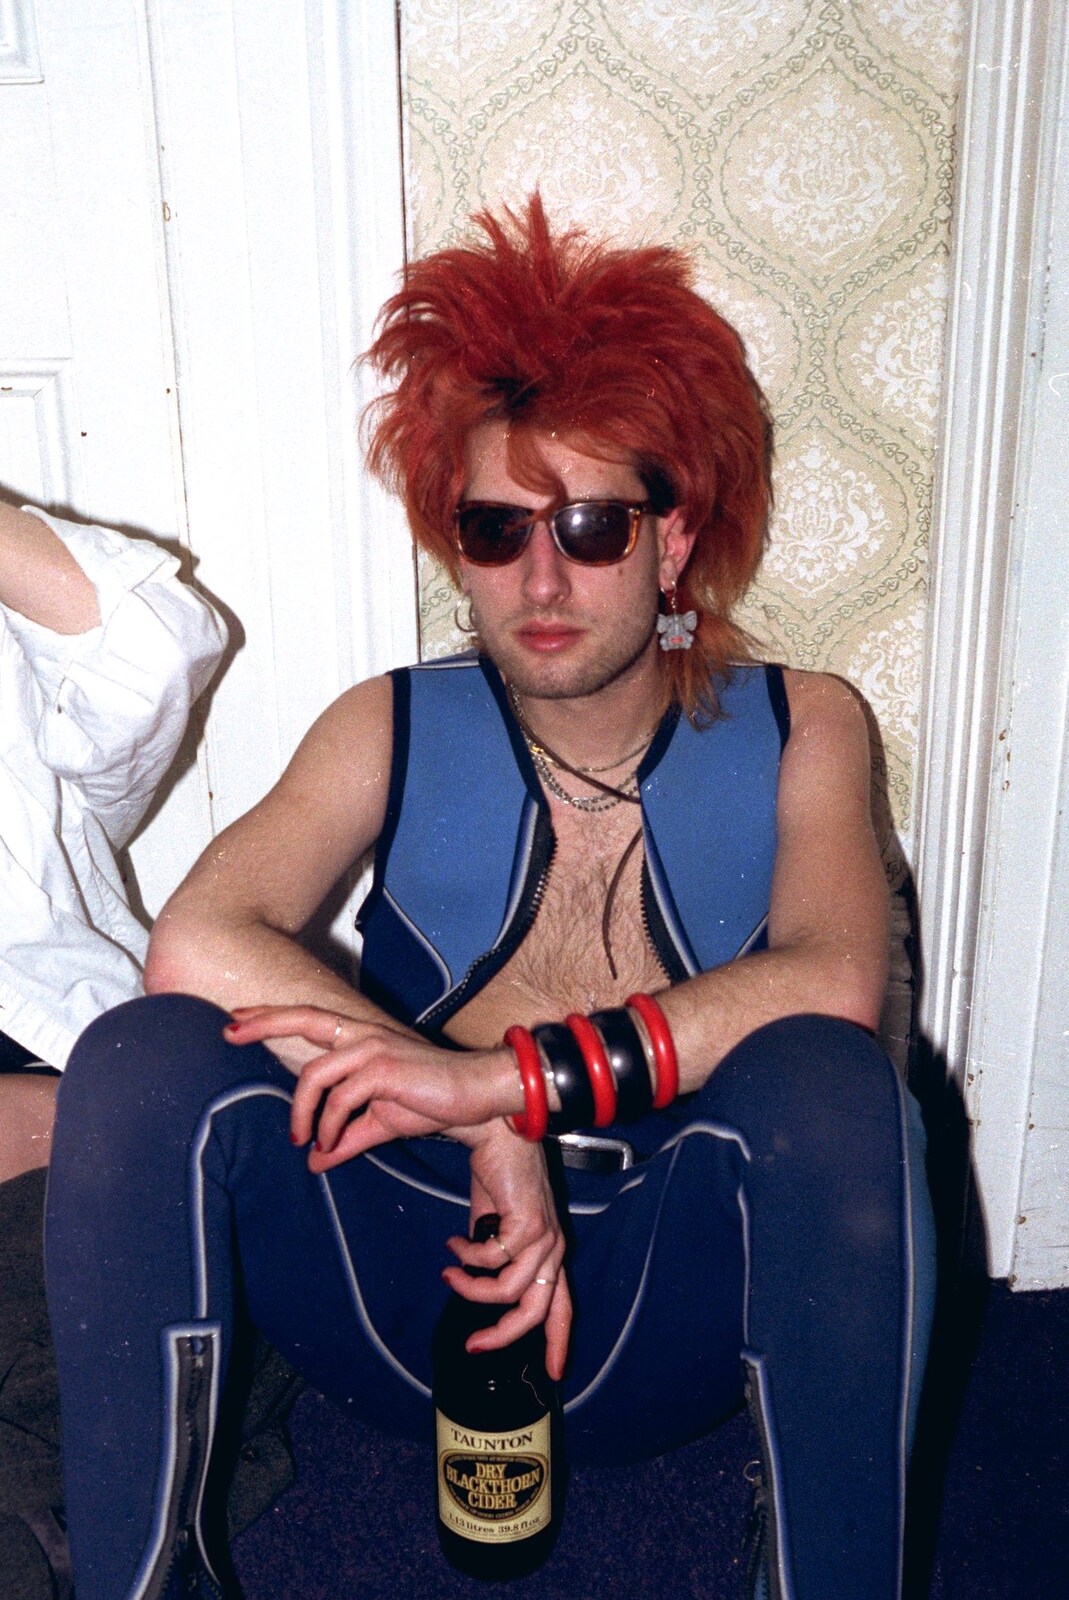 Punk surfer and some Dry Blackthorn Cider from Uni: Simon Read's Party, North Road East, Plymouth - 10th October 1986